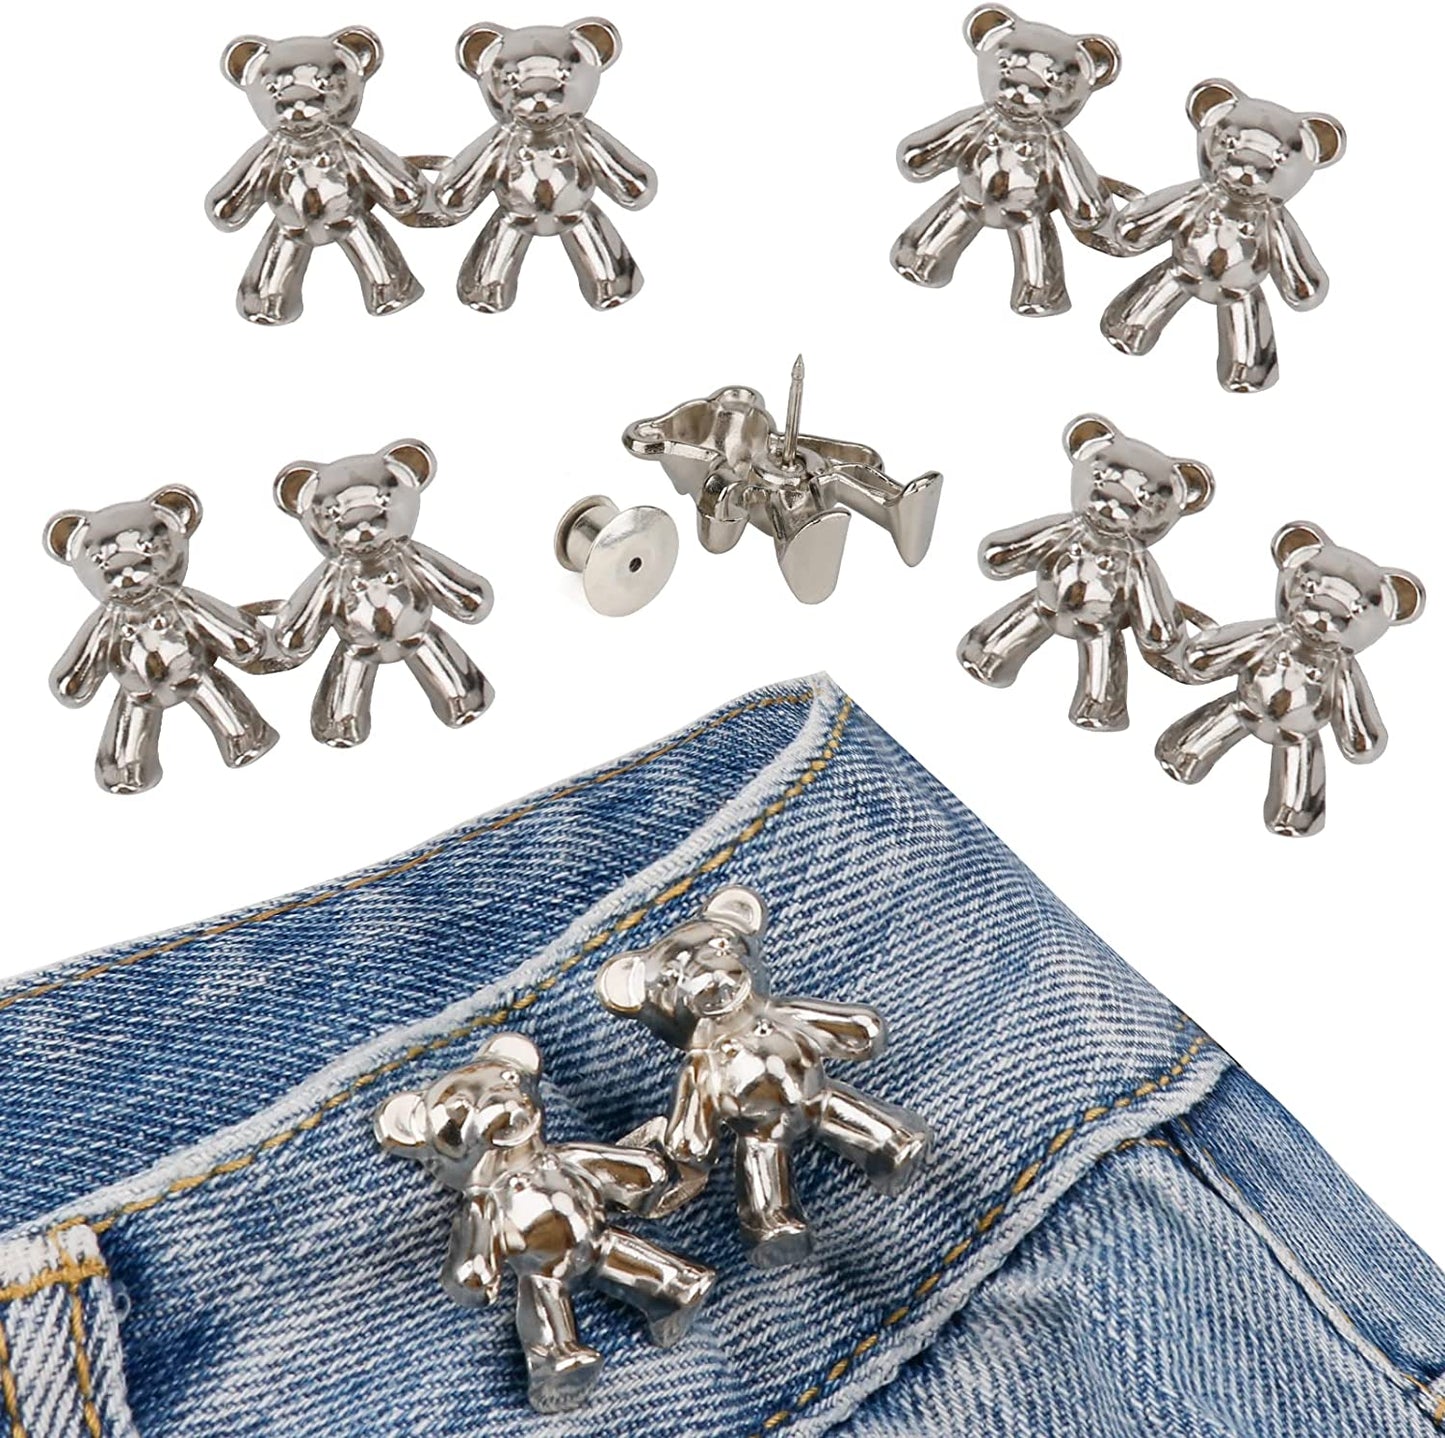  8 Sets Button Pins for Jeans Pants, Adjustable Reusable Jean  Buttons Pins Instant Reduce Loose Jeans, No Sew and No Tools Metal Pants  Button Replacement, Clips Jean Button Tightener